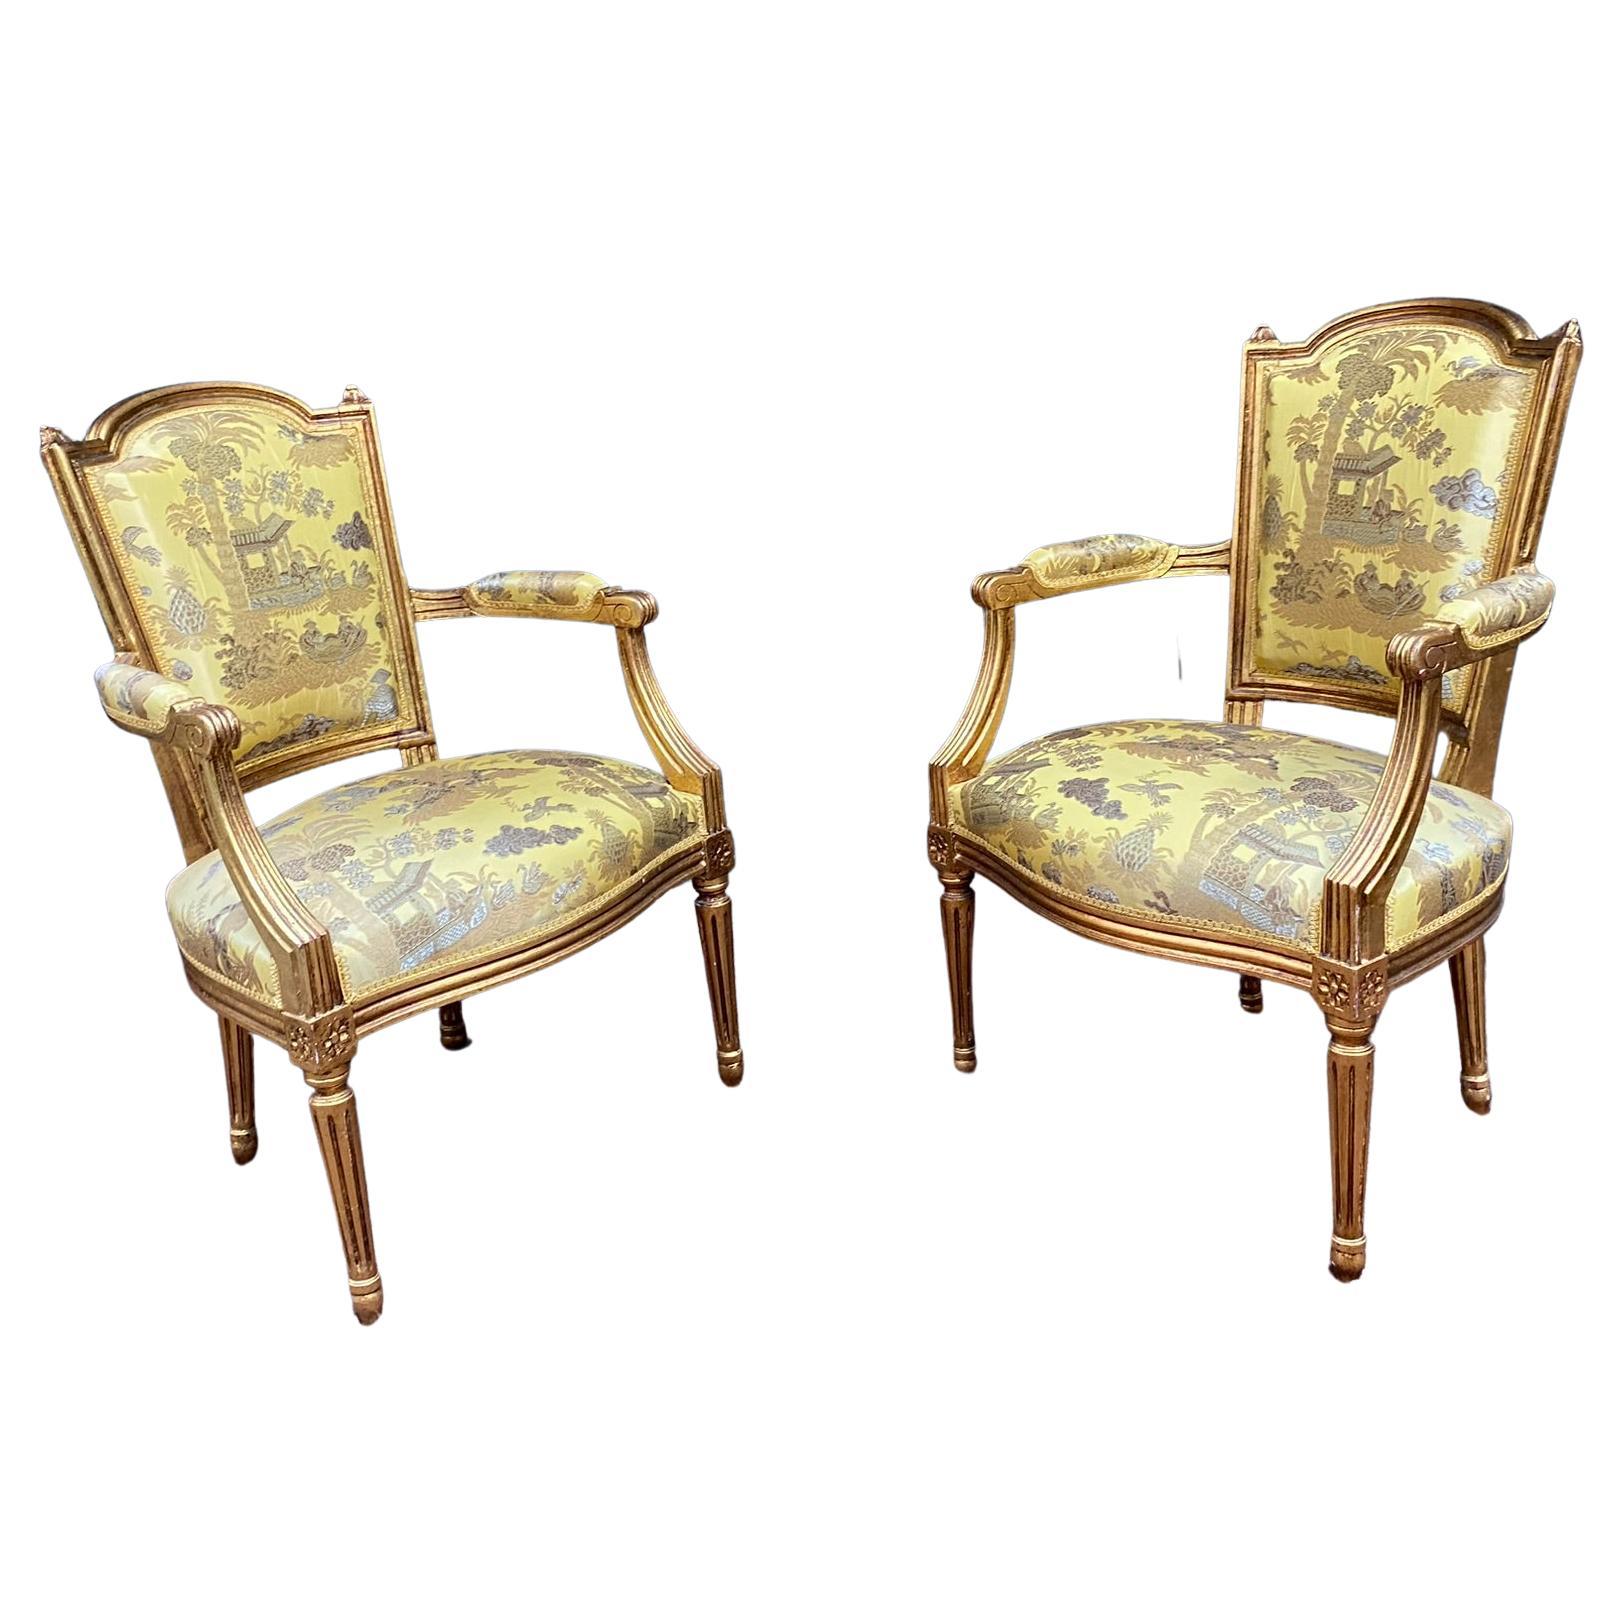 Pair of Louis XVI style armchairs in gilded wood, "Chinese" decor tapestry For Sale